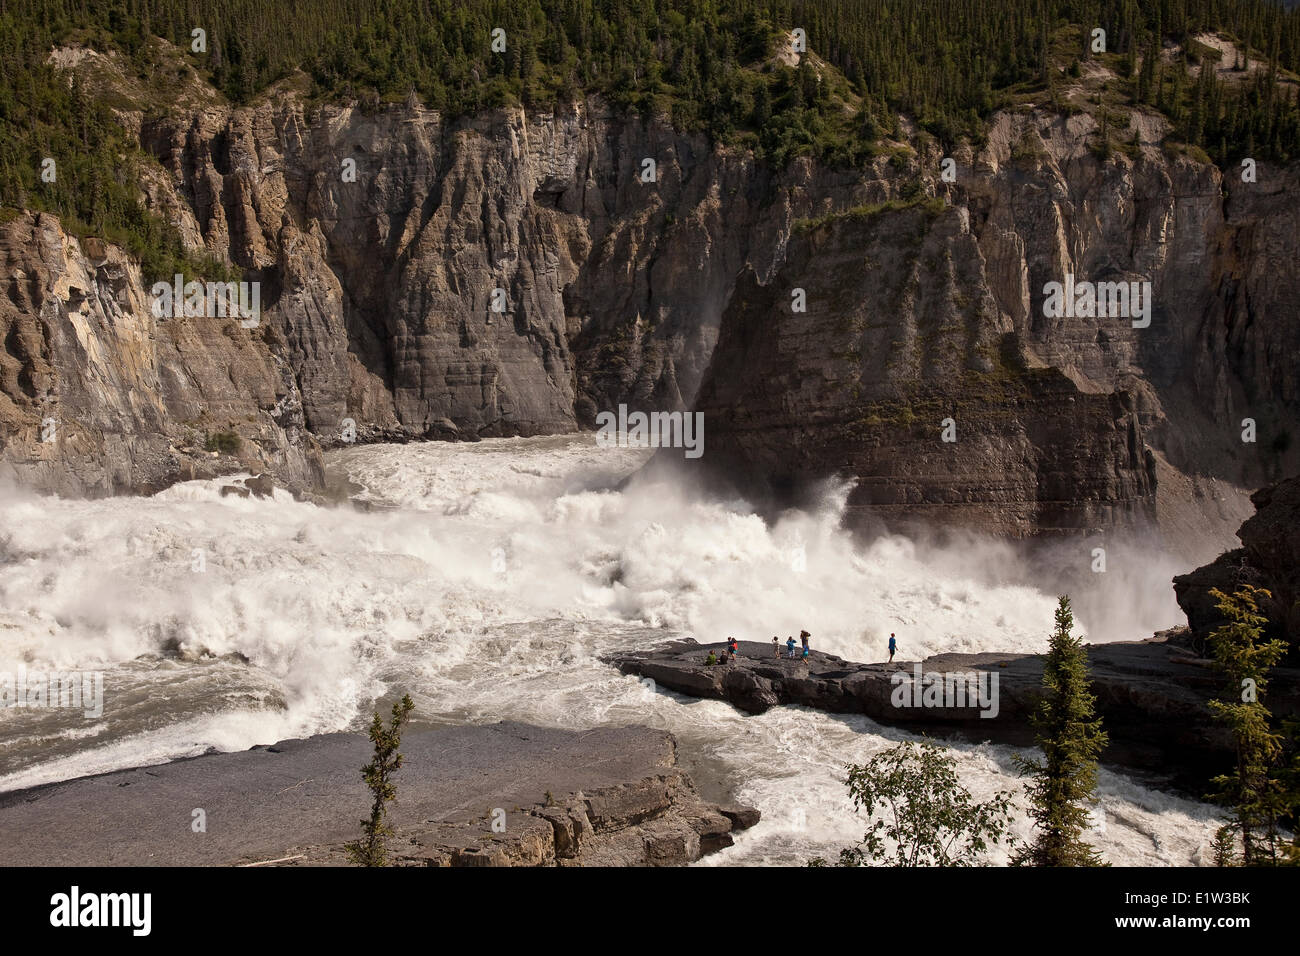 Group of people enjoy view at Sluicebox, Virginia Falls, Nahanni National Park Preserve, NWT, Canada. Stock Photo